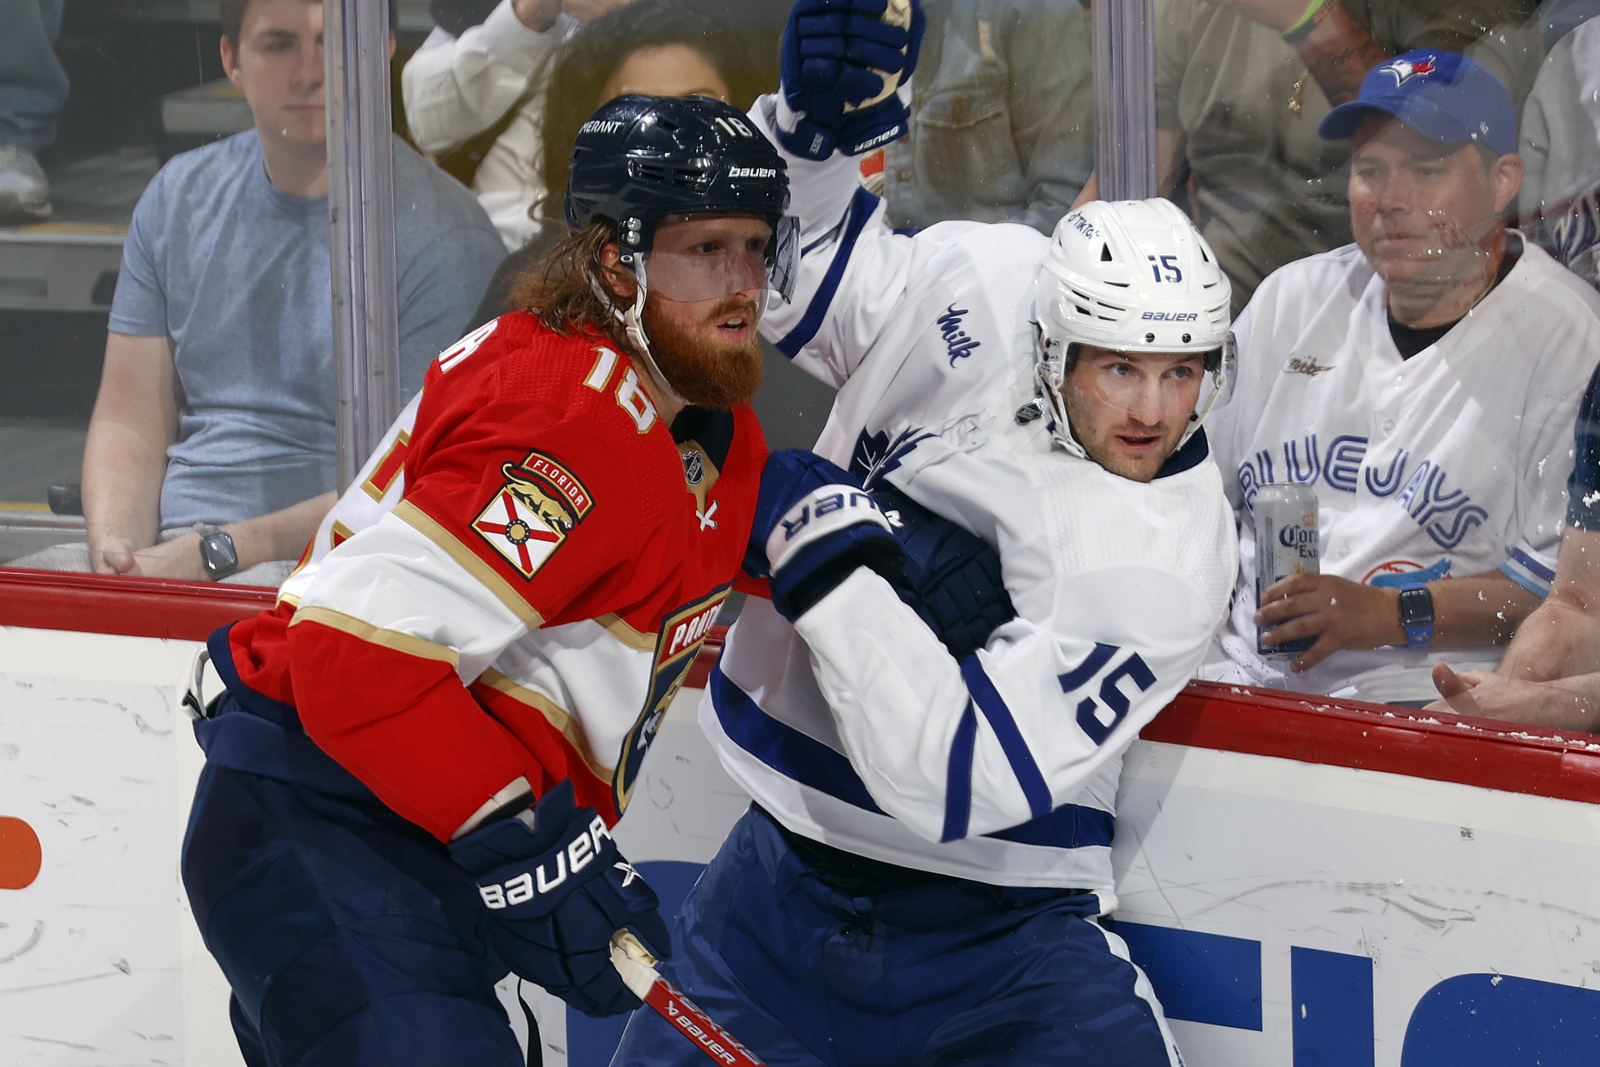 Toronto Maple Leafs vs Florida Panthers - March 23, 2023